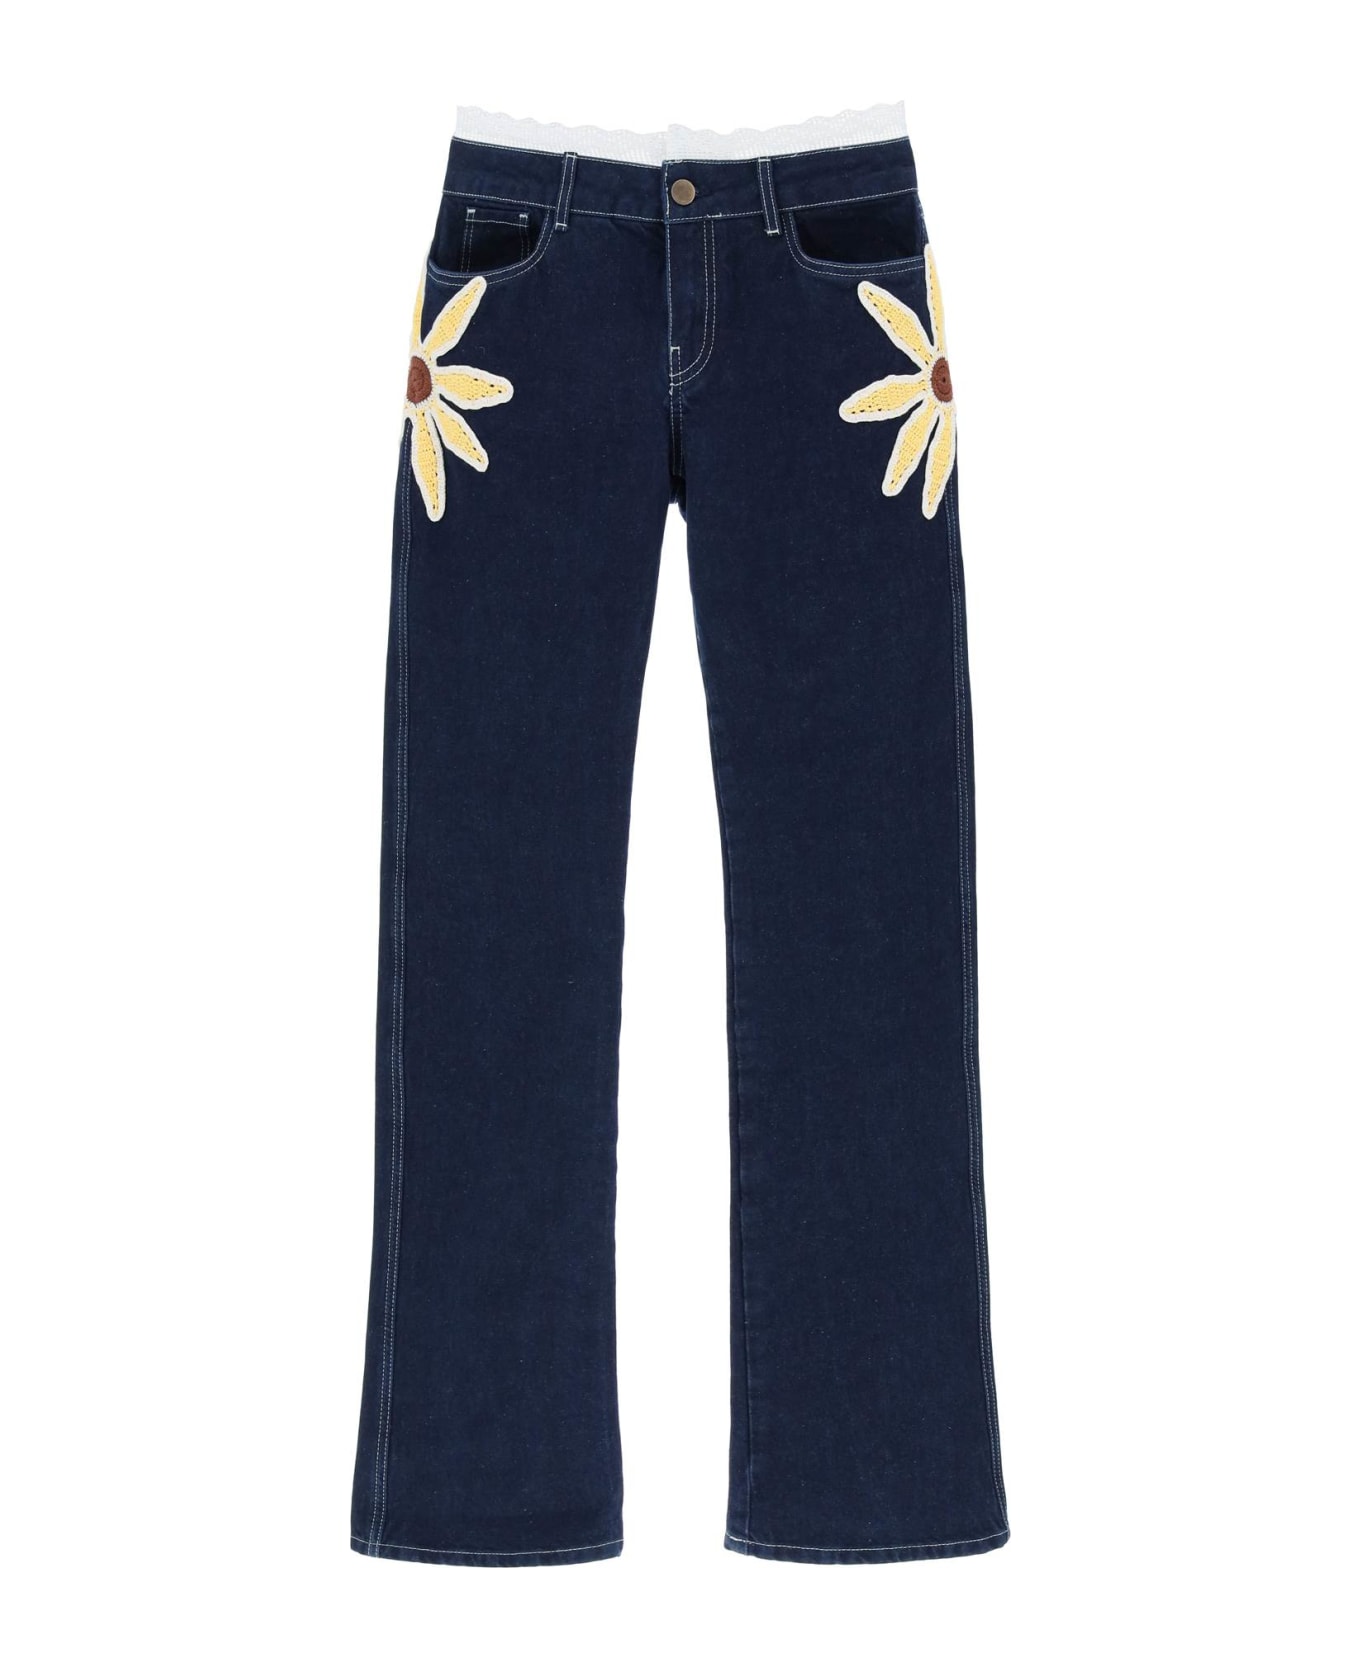 SIEDRES Low-rise Jeans With Crochet Flowers - BLUE (Blue) デニム